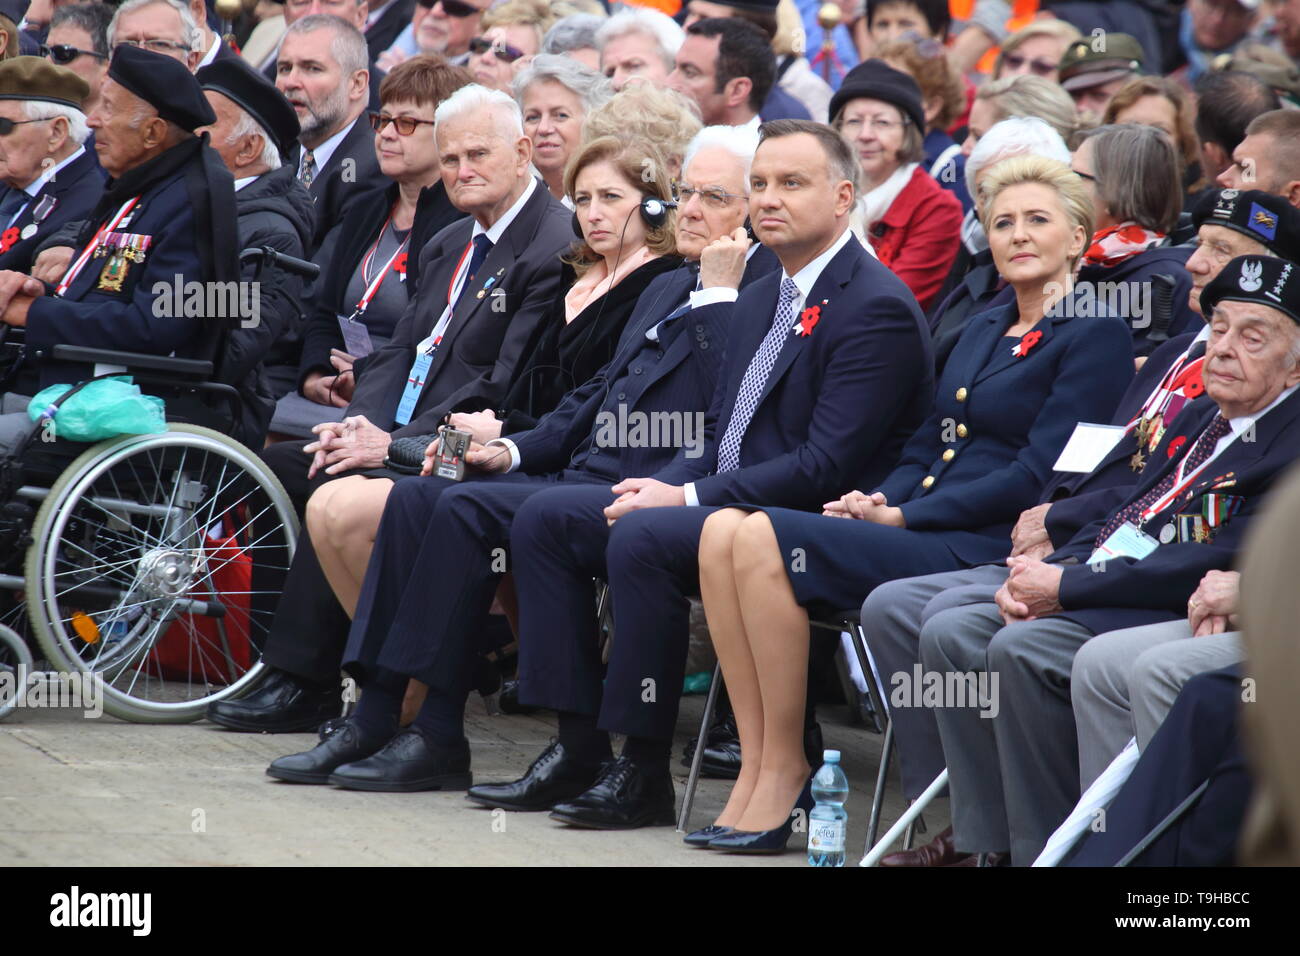 Cassino, Italy - May 18, 2019: The President of the Republic of Poland Andrzej Duda and the President of the Italian Republic Sergio Mattarella participate in the cerminia for the 75th anniversary of the Battle of Montecassino in the Polish military cemetery Stock Photo